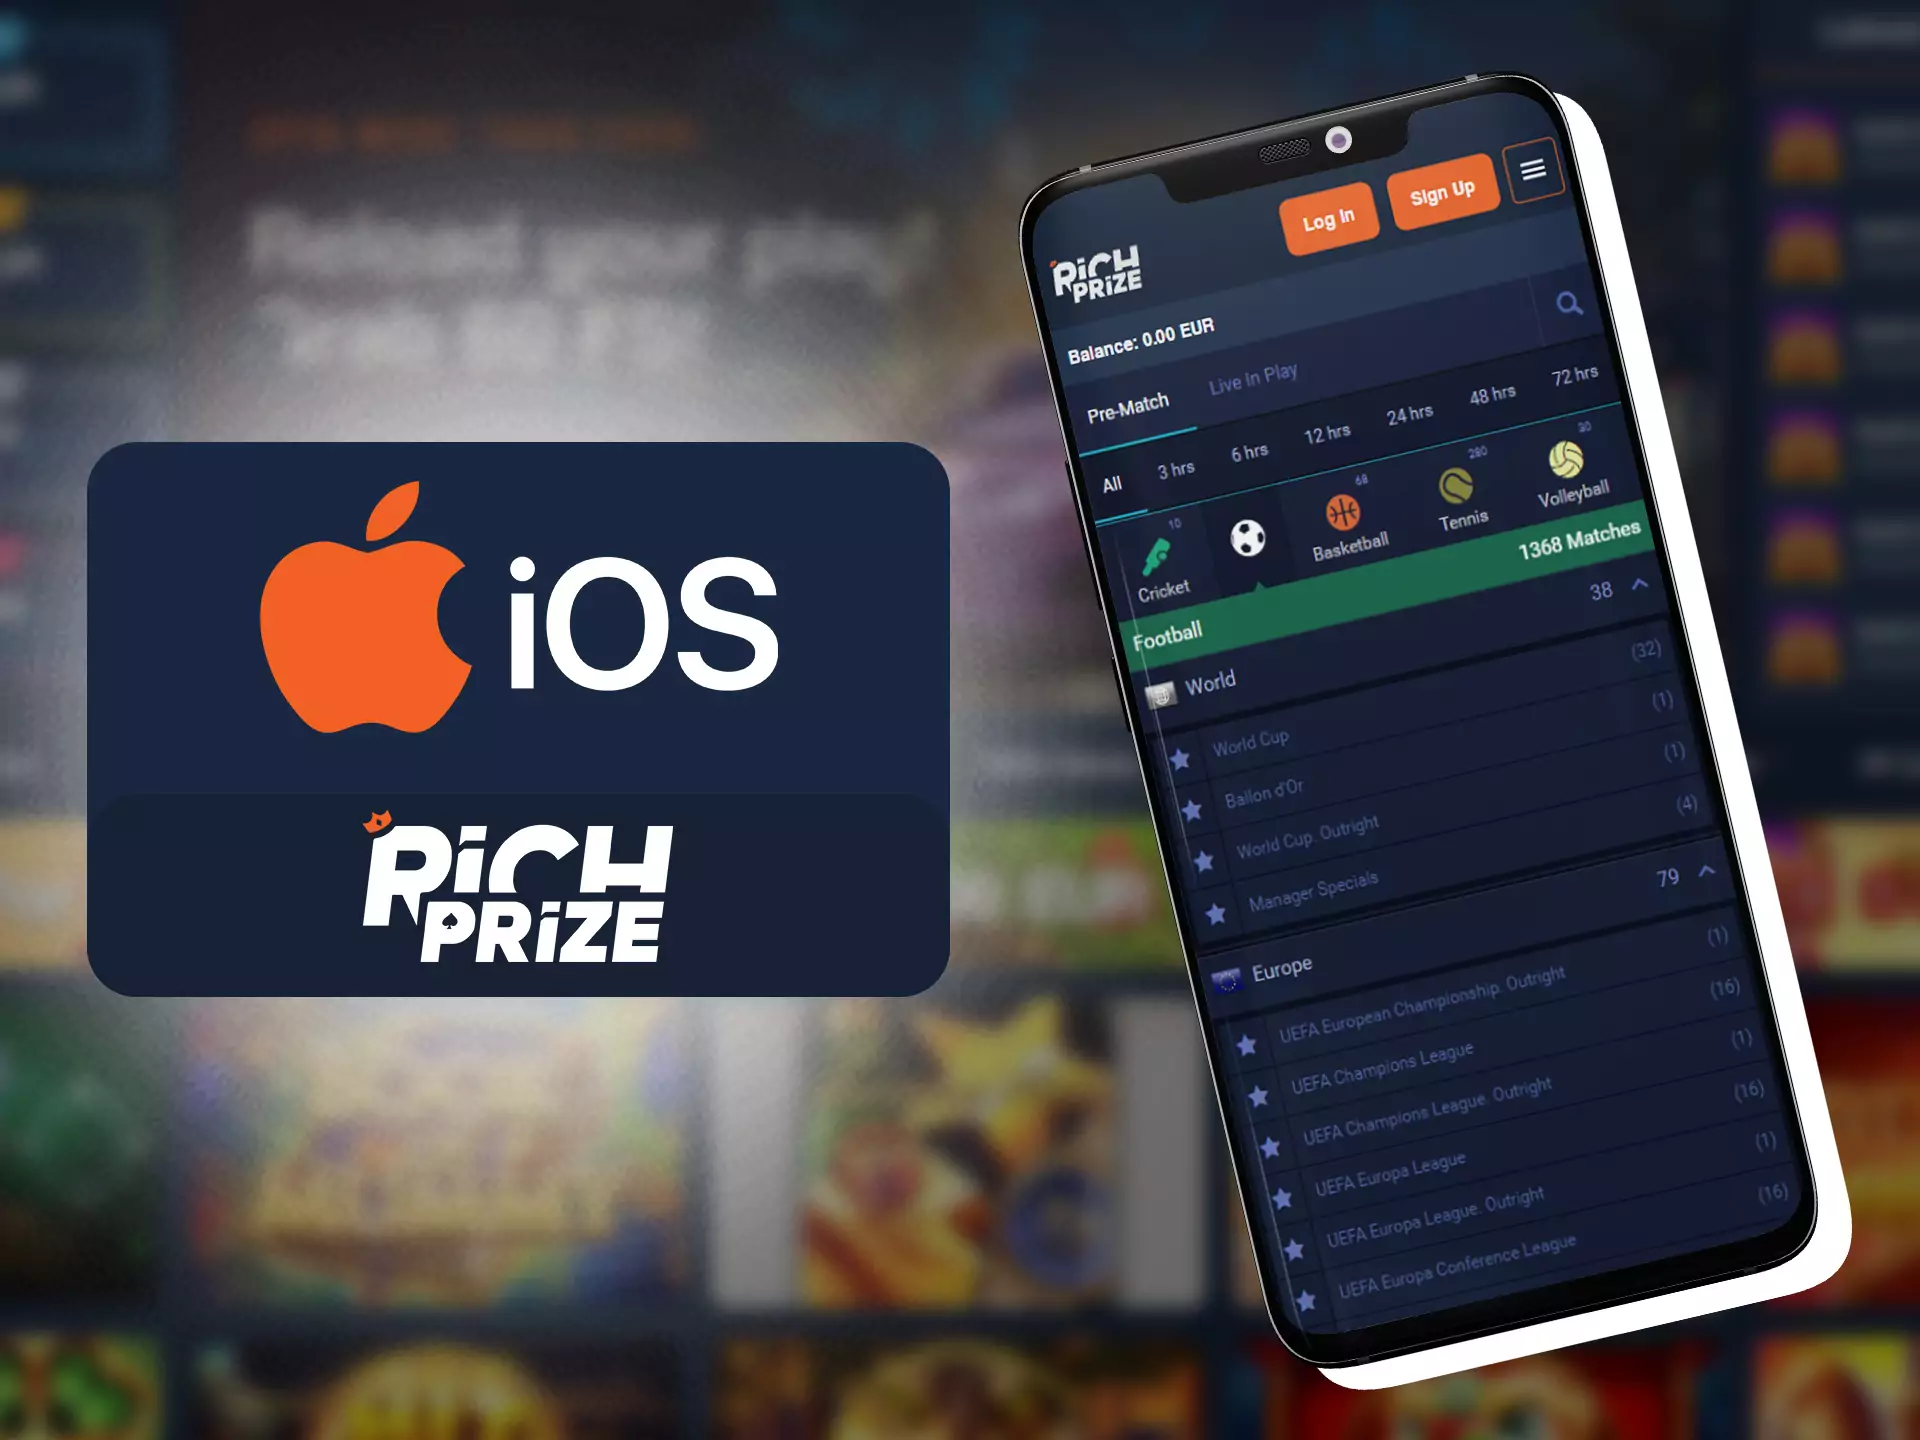 Bet on and play Richprize casino games on your iOS devices..